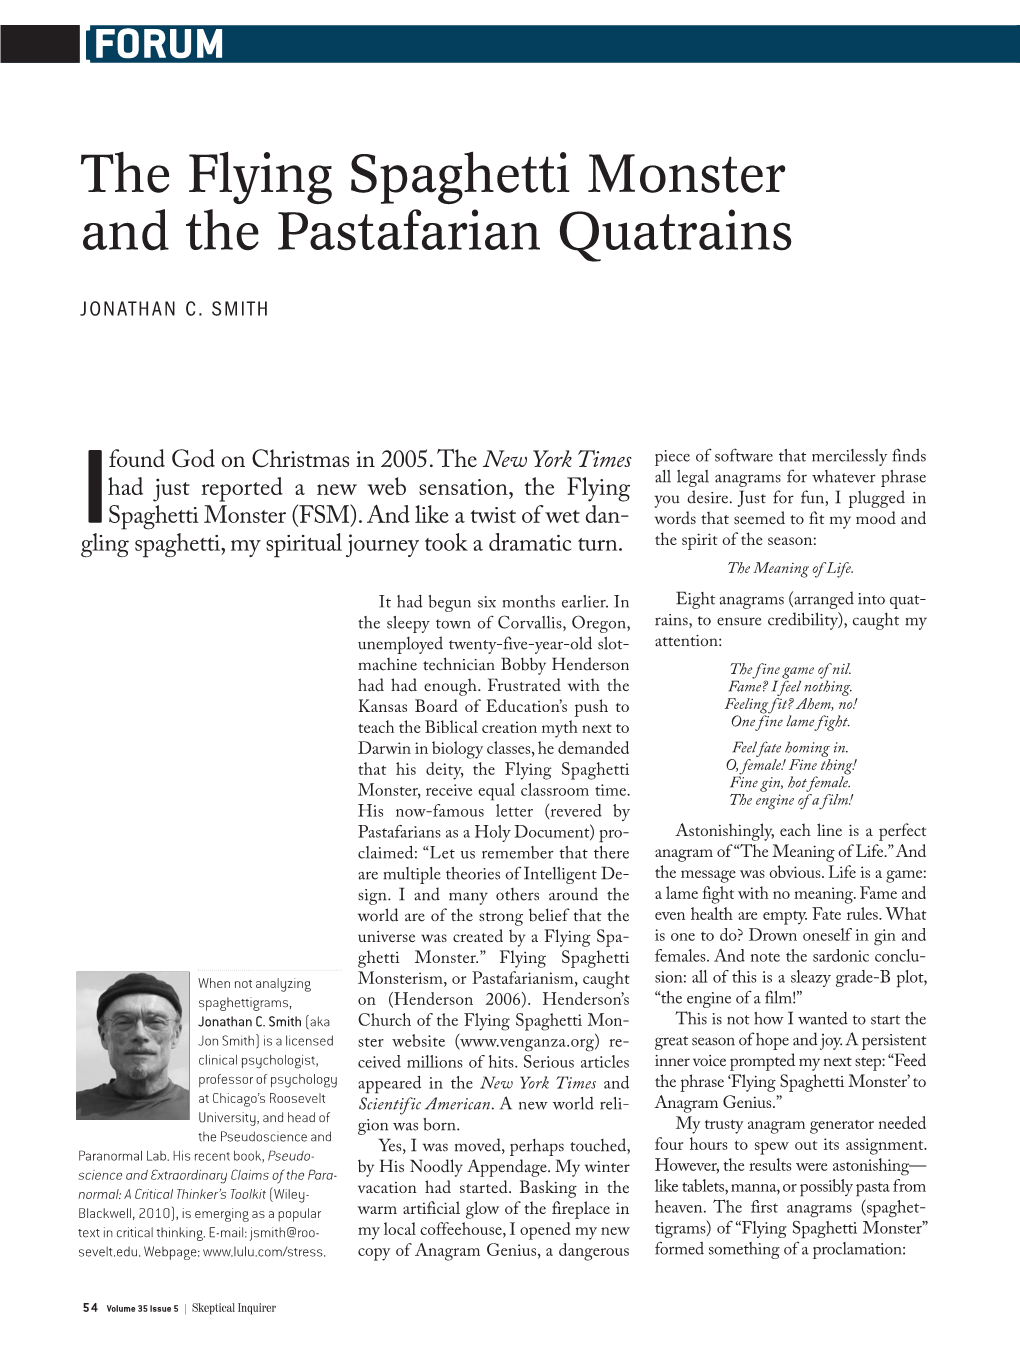 The Flying Spaghetti Monster and the Pastafarian Quatrains